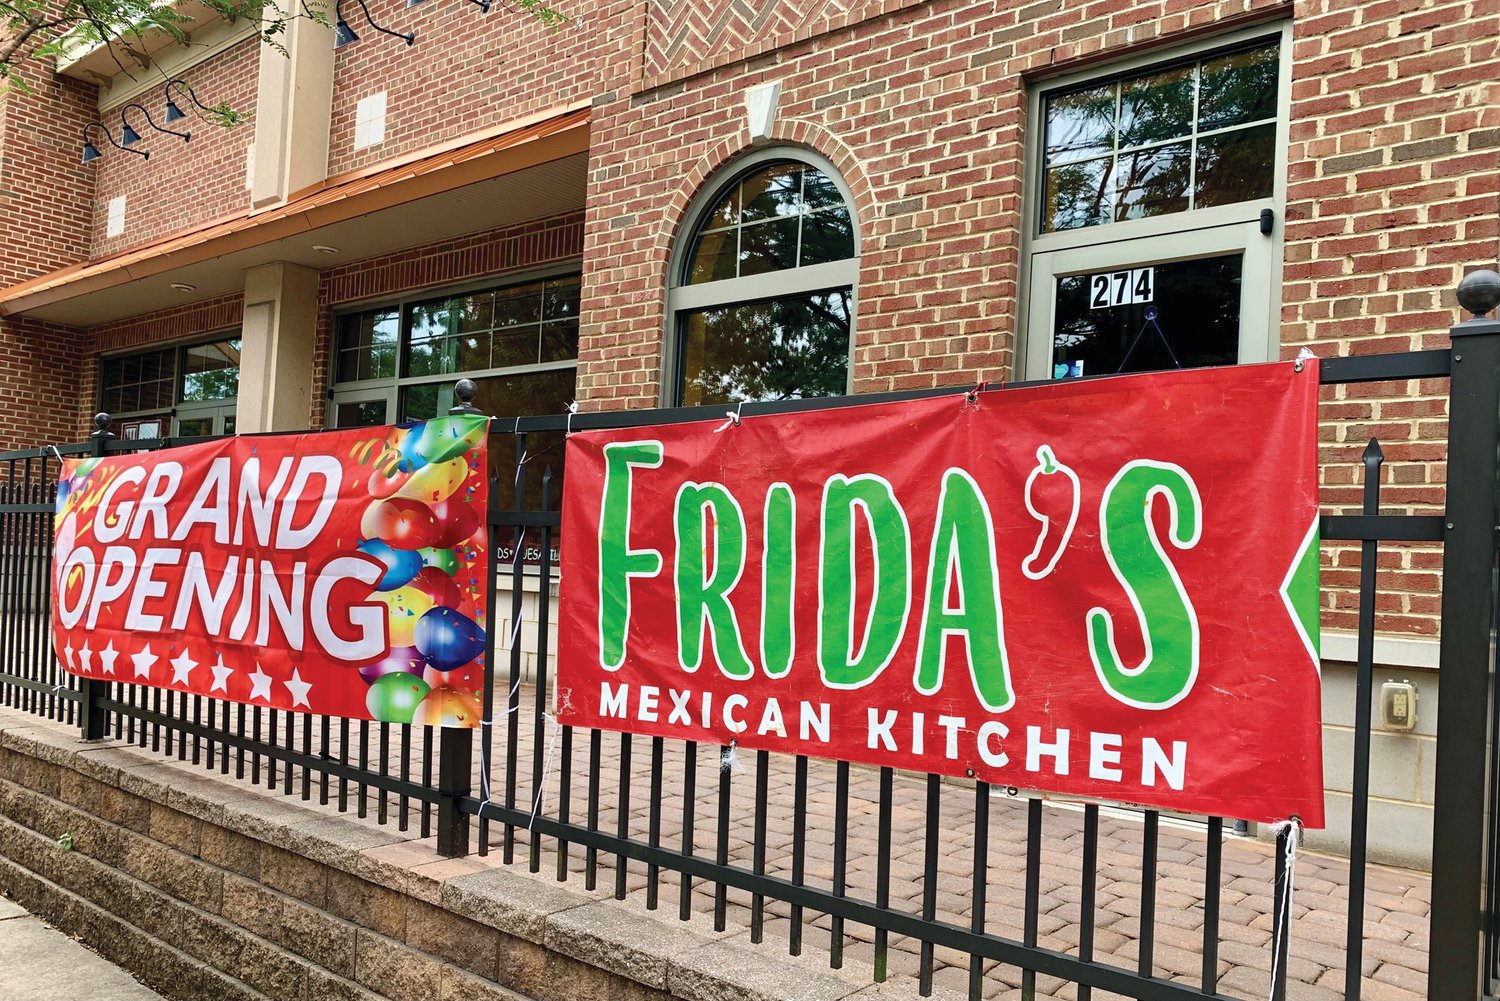 Las Frida’s Mexican Kitchen’s newest location is now open at 274 S. Main St. in Doylestown.